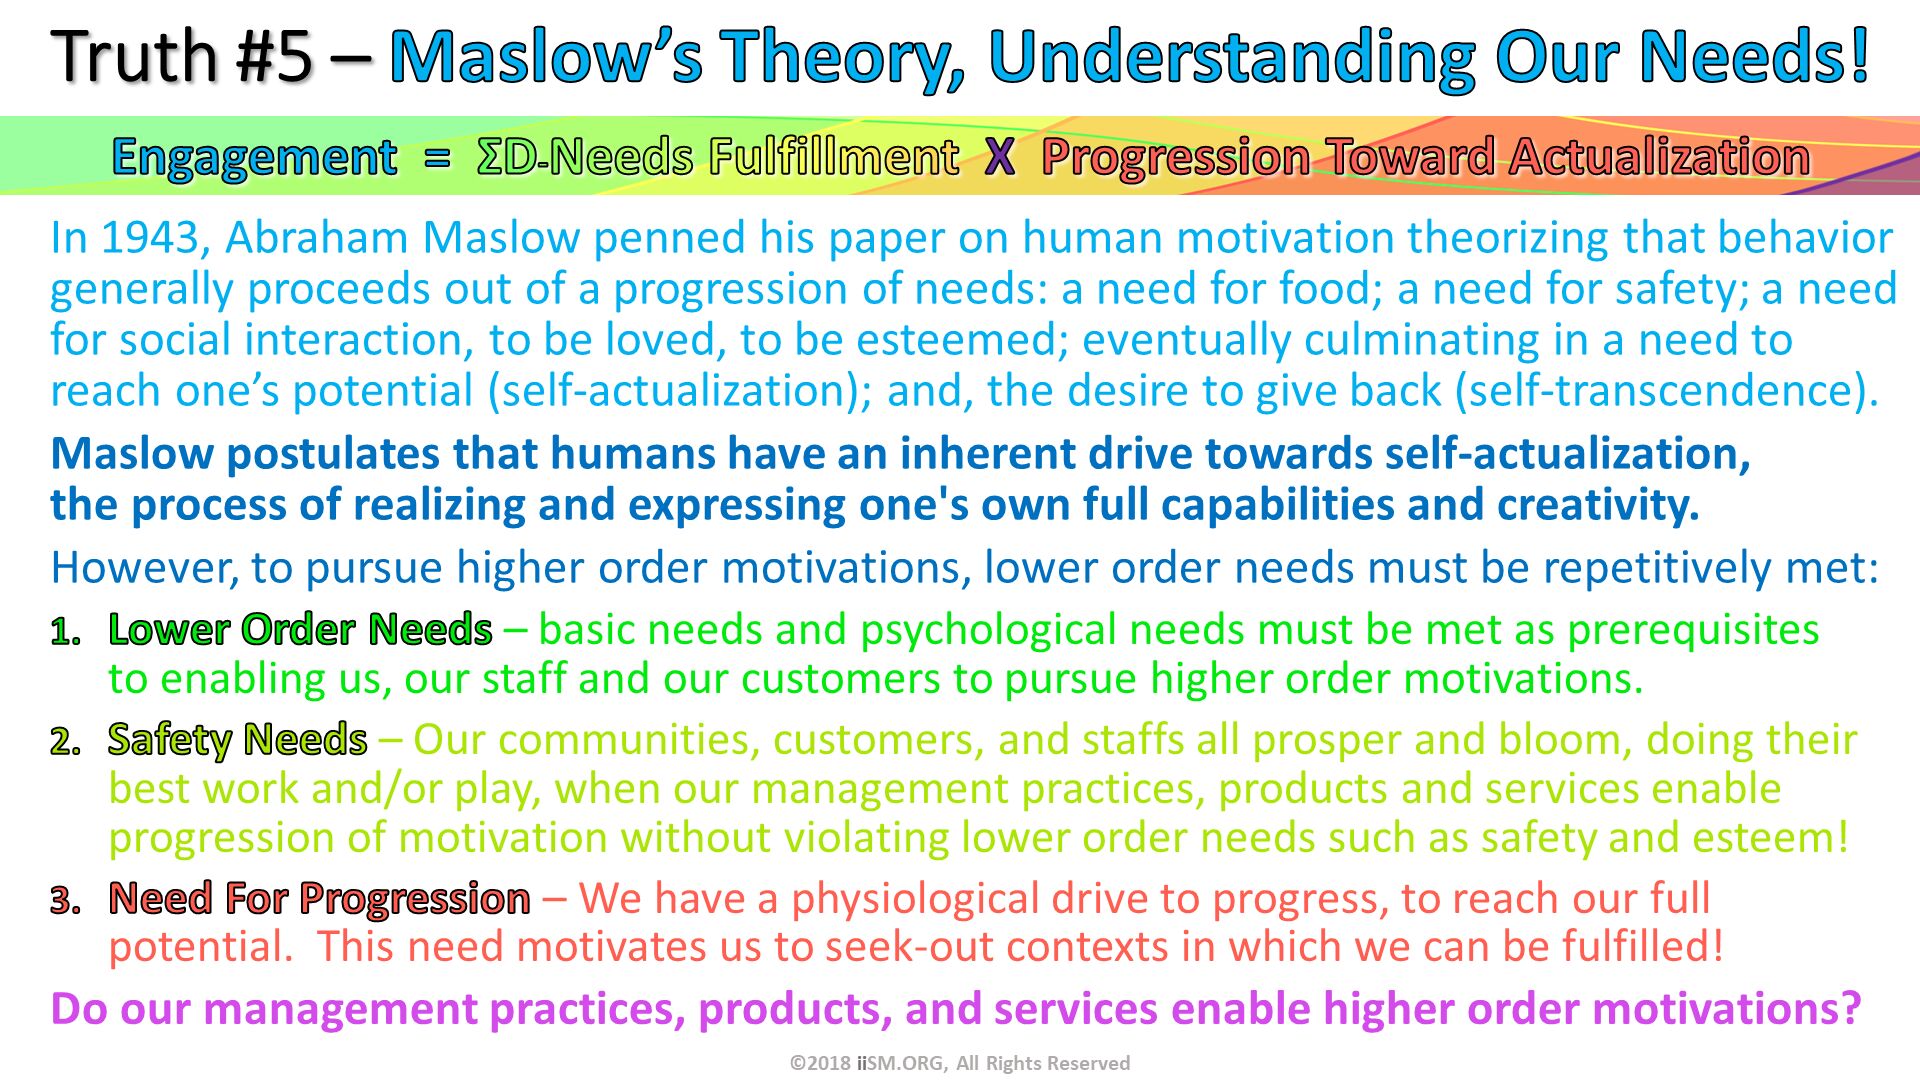 In 1943, Abraham Maslow penned his paper on human motivation theorizing that behavior generally proceeds out of a progression of needs: a need for food; a need for safety; a need for social interaction, to be loved, to be esteemed; eventually culminating in a need to reach one’s potential (self-actualization); and, the desire to give back (self-transcendence).
Maslow postulates that humans have an inherent drive towards self-actualization, the process of realizing and expressing one's own full capabilities and creativity. 
However, to pursue higher order motivations, lower order needs must be repetitively met: . Truth #5 – Maslow’s Theory, Understanding Our Needs! . ©2018 iiSM.ORG, All Rights Reserved. Lower Order Needs – basic needs and psychological needs must be met as prerequisites to enabling us, our staff and our customers to pursue higher order motivations.
Safety Needs – Our communities, customers, and staffs all prosper and bloom, doing their best work and/or play, when our management practices, products and services enable progression of motivation without violating lower order needs such as safety and esteem!
Need For Progression – We have a physiological drive to progress, to reach our full potential.  This need motivates us to seek-out contexts in which we can be fulfilled!
Do our management practices, products, and services enable higher order motivations?

. Engagement  =  ΣD-Needs Fulfillment  X  Progression Toward Actualization. 